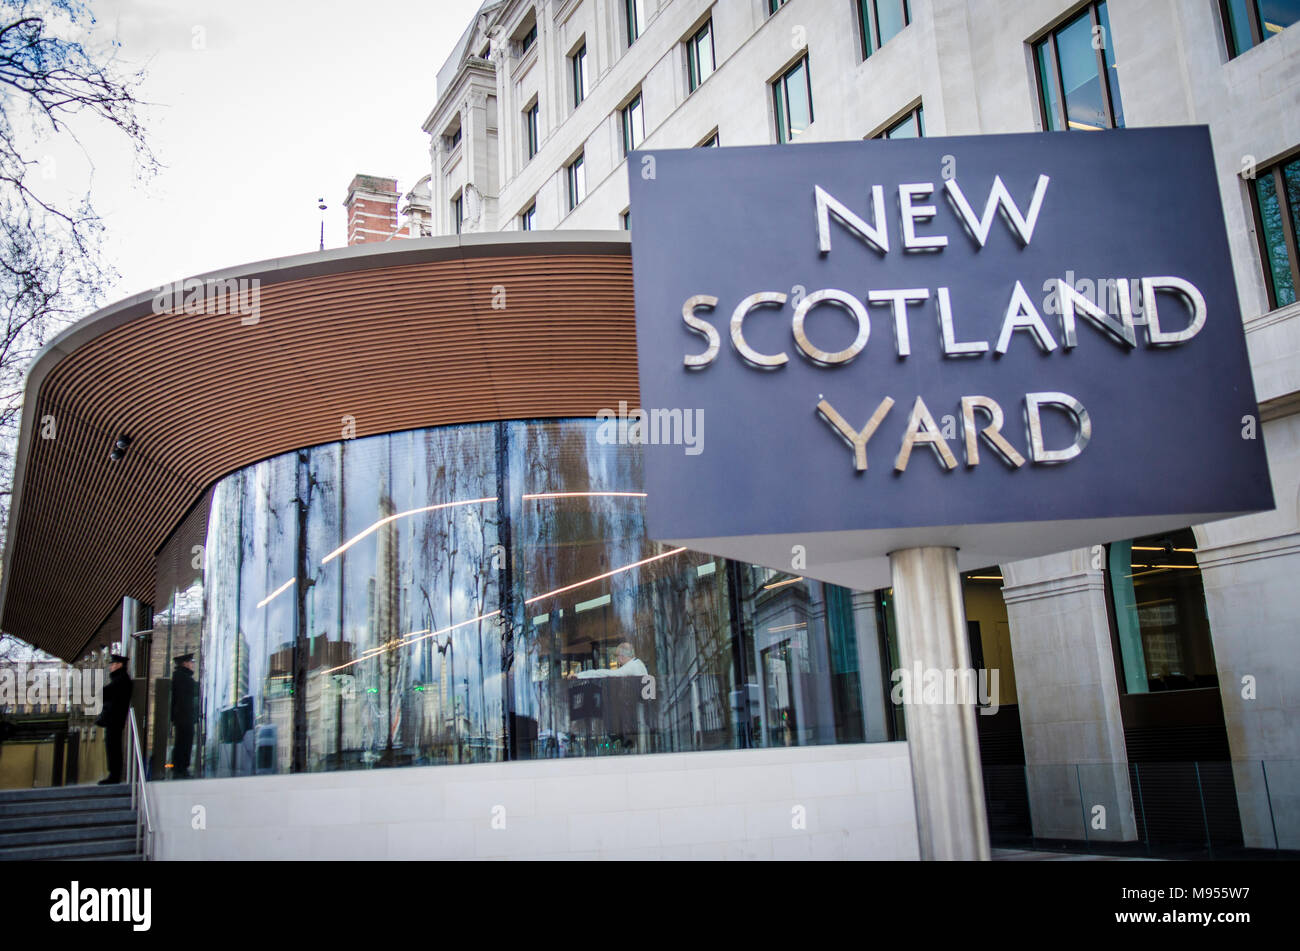 New Scotland Yard- the home of the Metropolitan Police Force headquarters, located on Victoria Embankment, London. Stock Photo